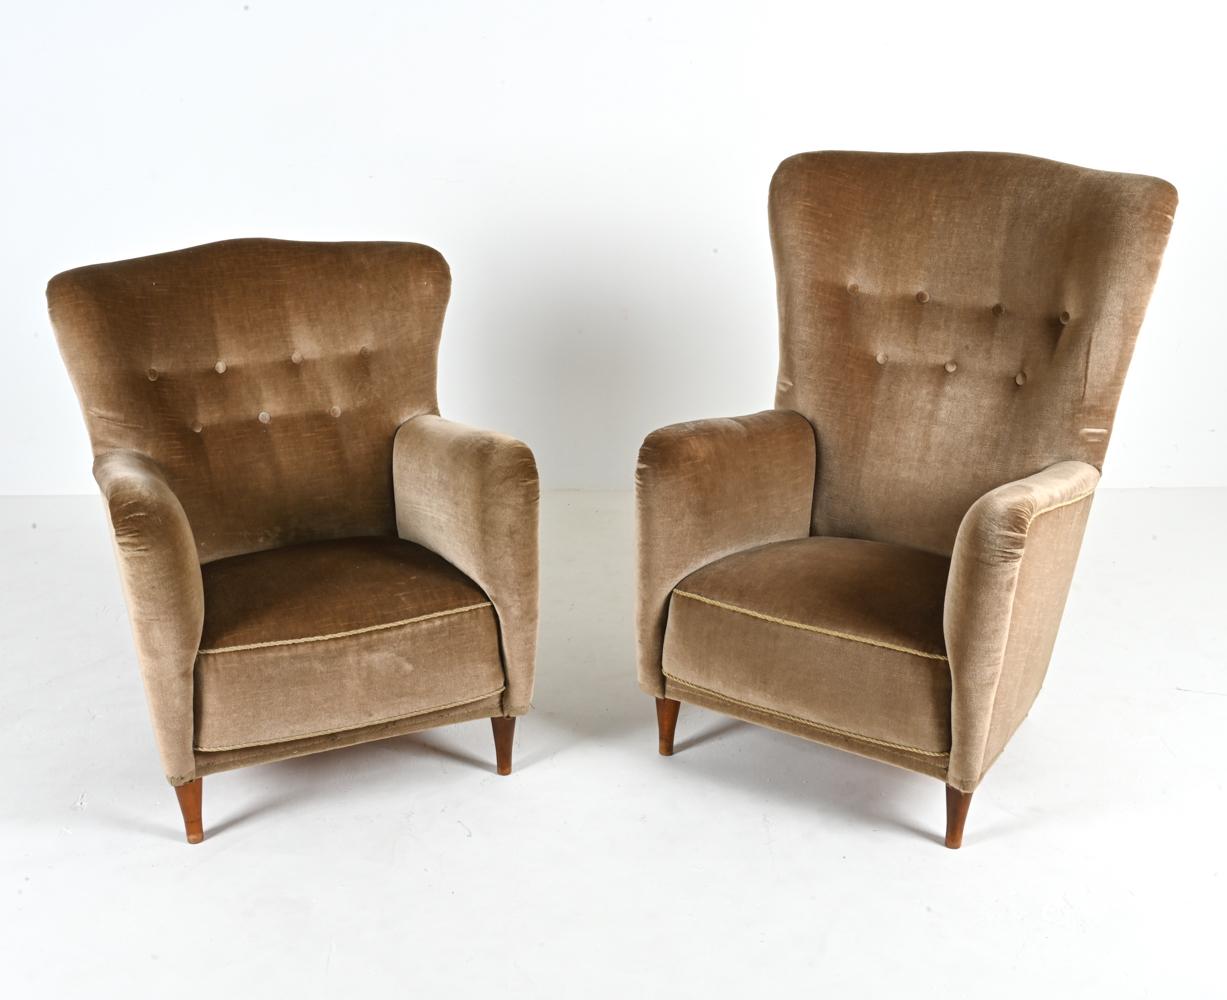 Transport yourself to the heart of mid-century Denmark with our captivating pair of Danish Easy Chairs, reminiscent of the artistry and elegance of Frits Henningsen's iconic designs. Curated from the charismatic 1950's, these chairs capture the